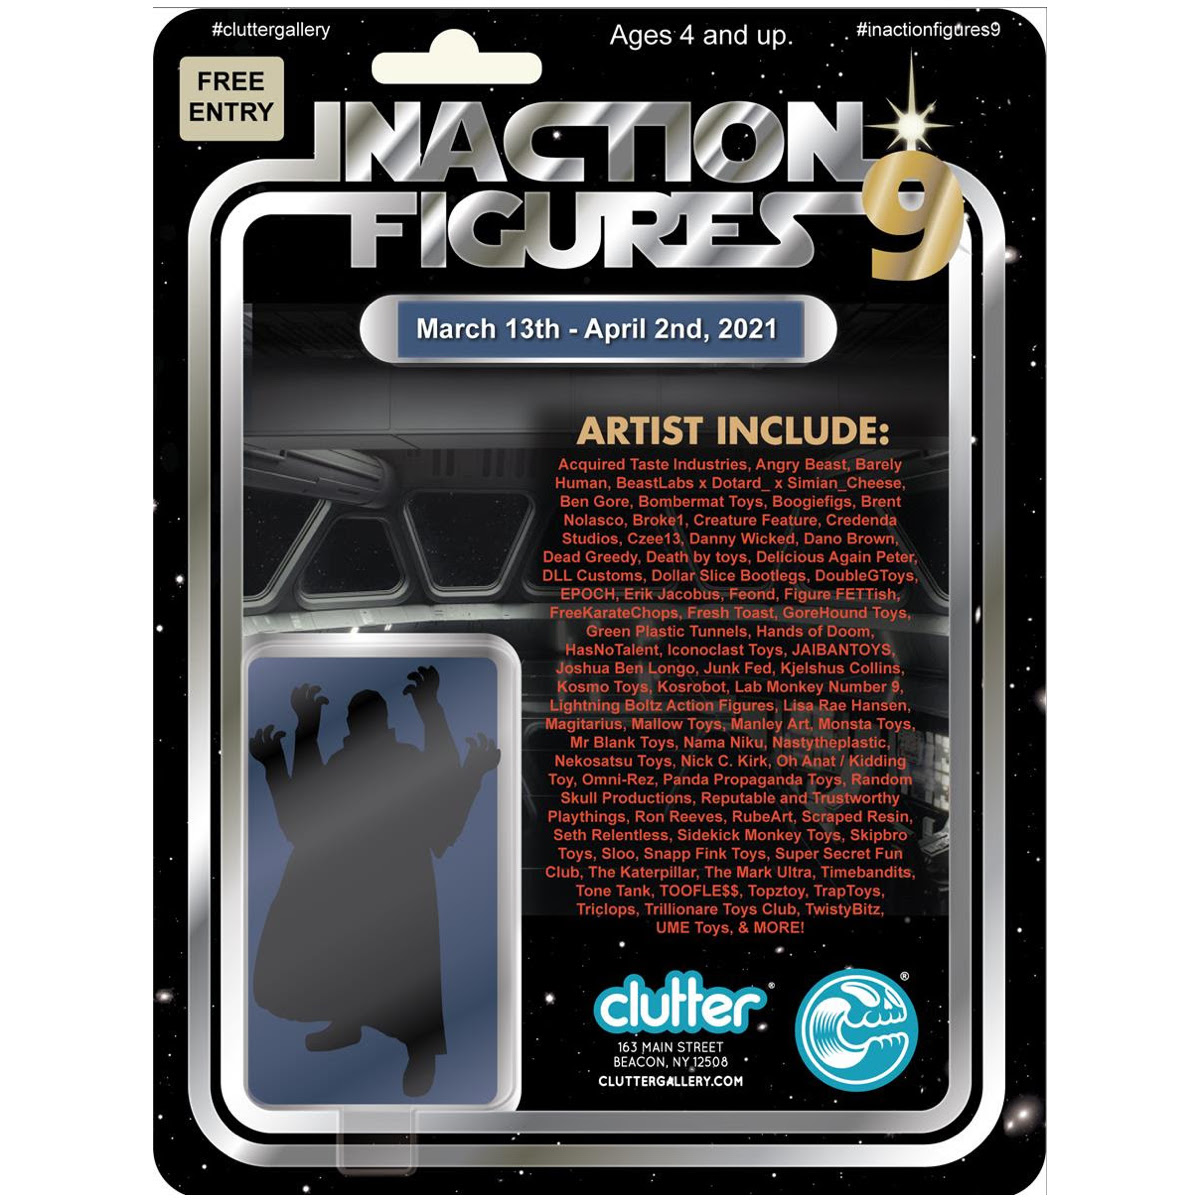 In]Action Figures 9 @ Clutter Gallery (Opens March 13)